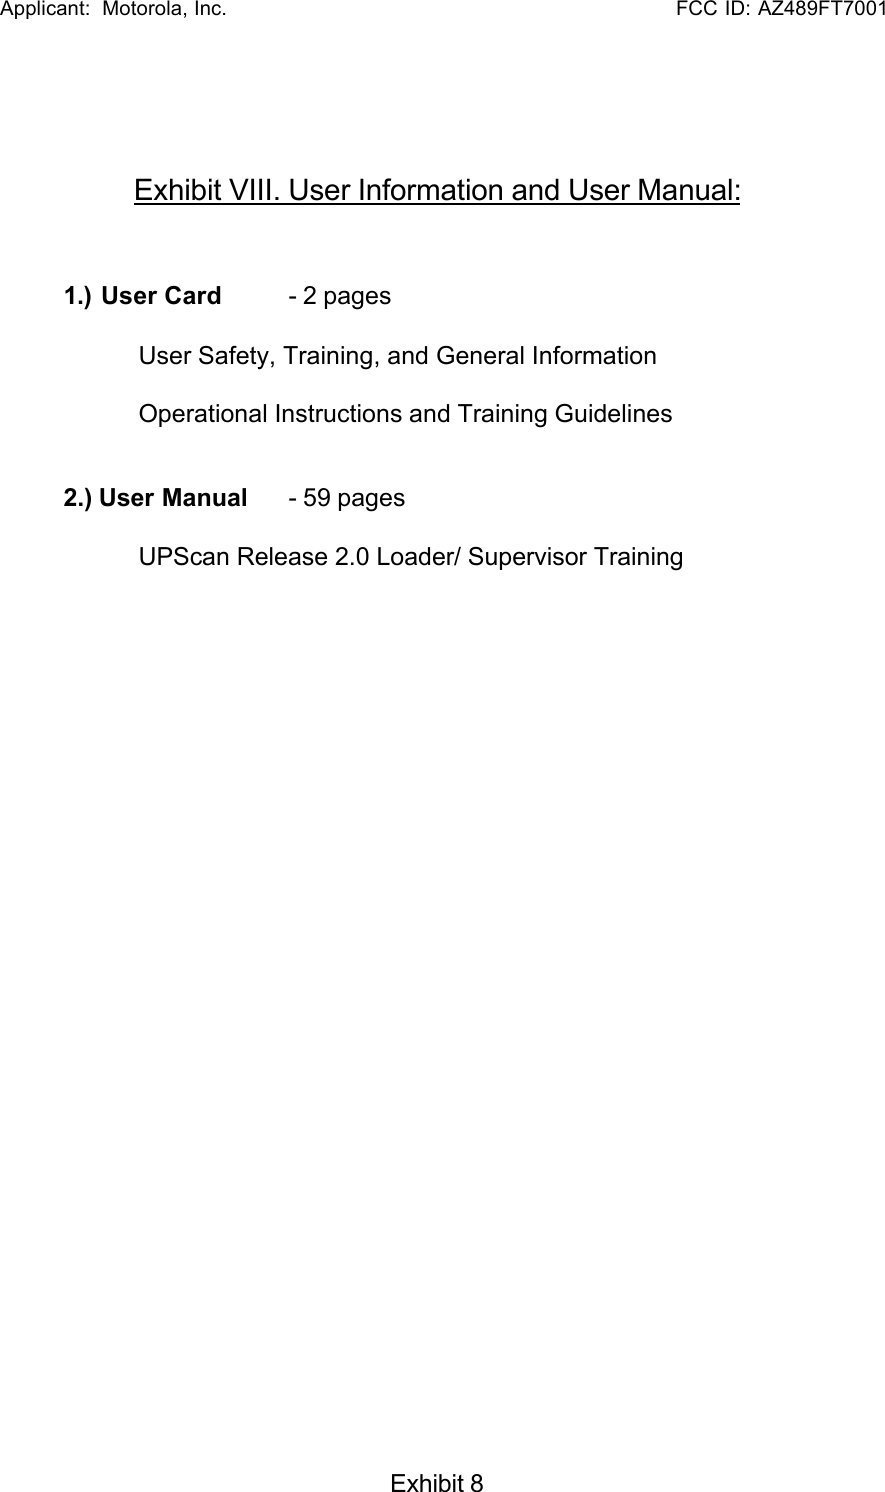   Applicant:  Motorola, Inc.                                                      FCC ID: AZ489FT7001Exhibit 8Exhibit VIII. User Information and User Manual:1.) User Card  - 2 pagesUser Safety, Training, and General InformationOperational Instructions and Training Guidelines2.) User Manual   - 59 pagesUPScan Release 2.0 Loader/ Supervisor Training